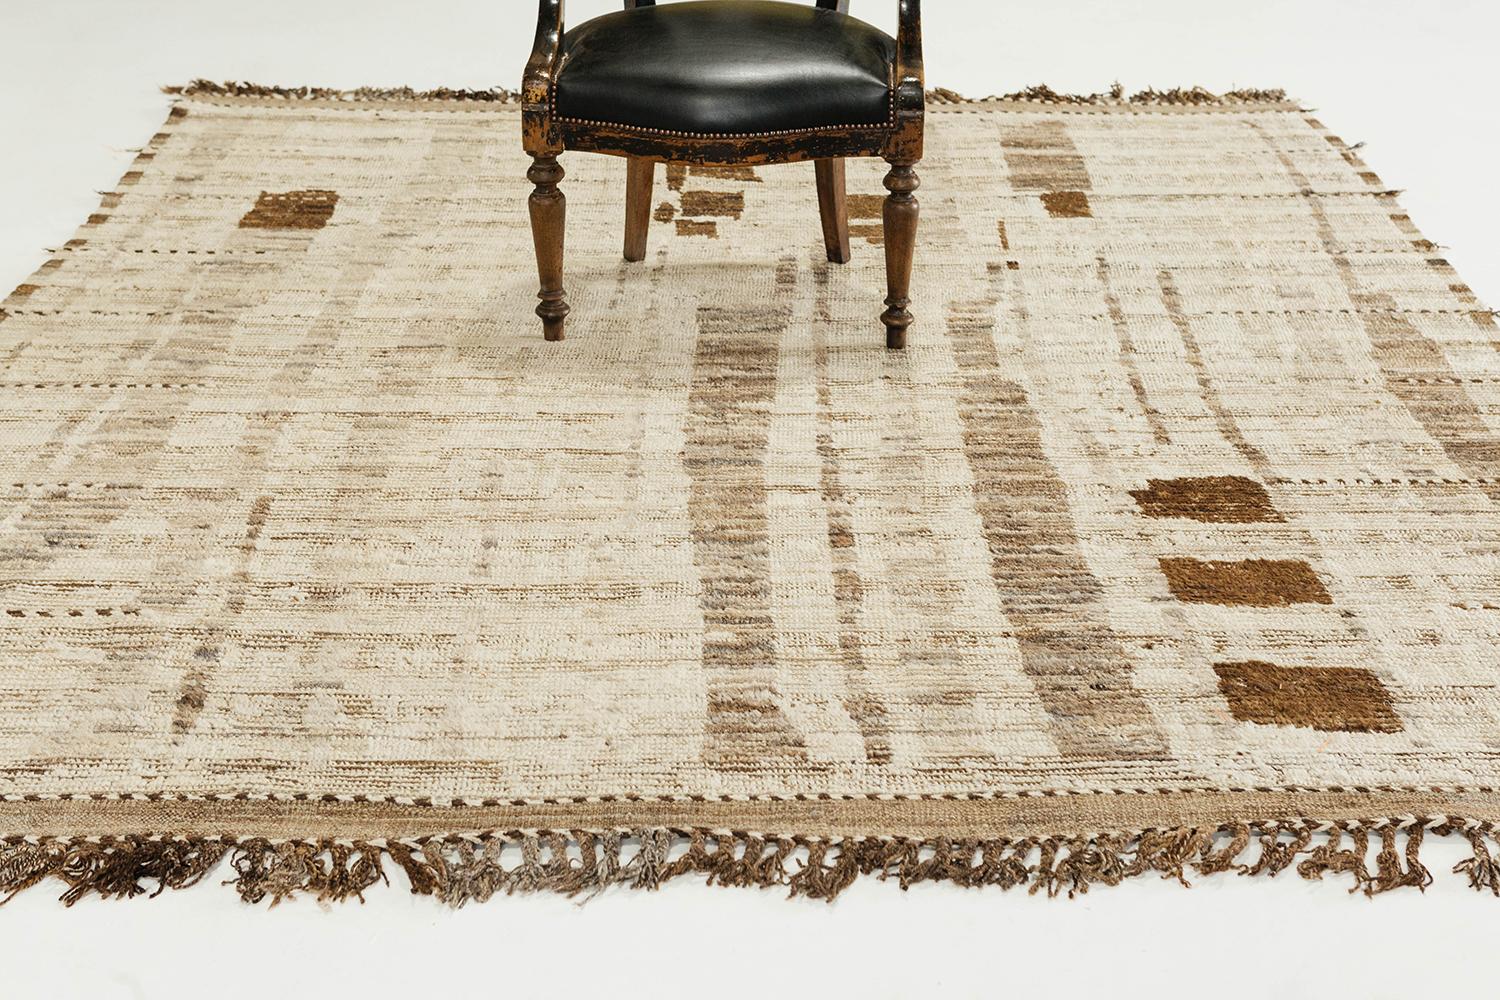 'Talassemtane' is a beautifully textured rug with irregular motifs inspired from the Atlas Mountains of Morocco. The neutral colors work cohesively to make for a great contemporary interpretation for the modern design world. Mehraban's Atlas